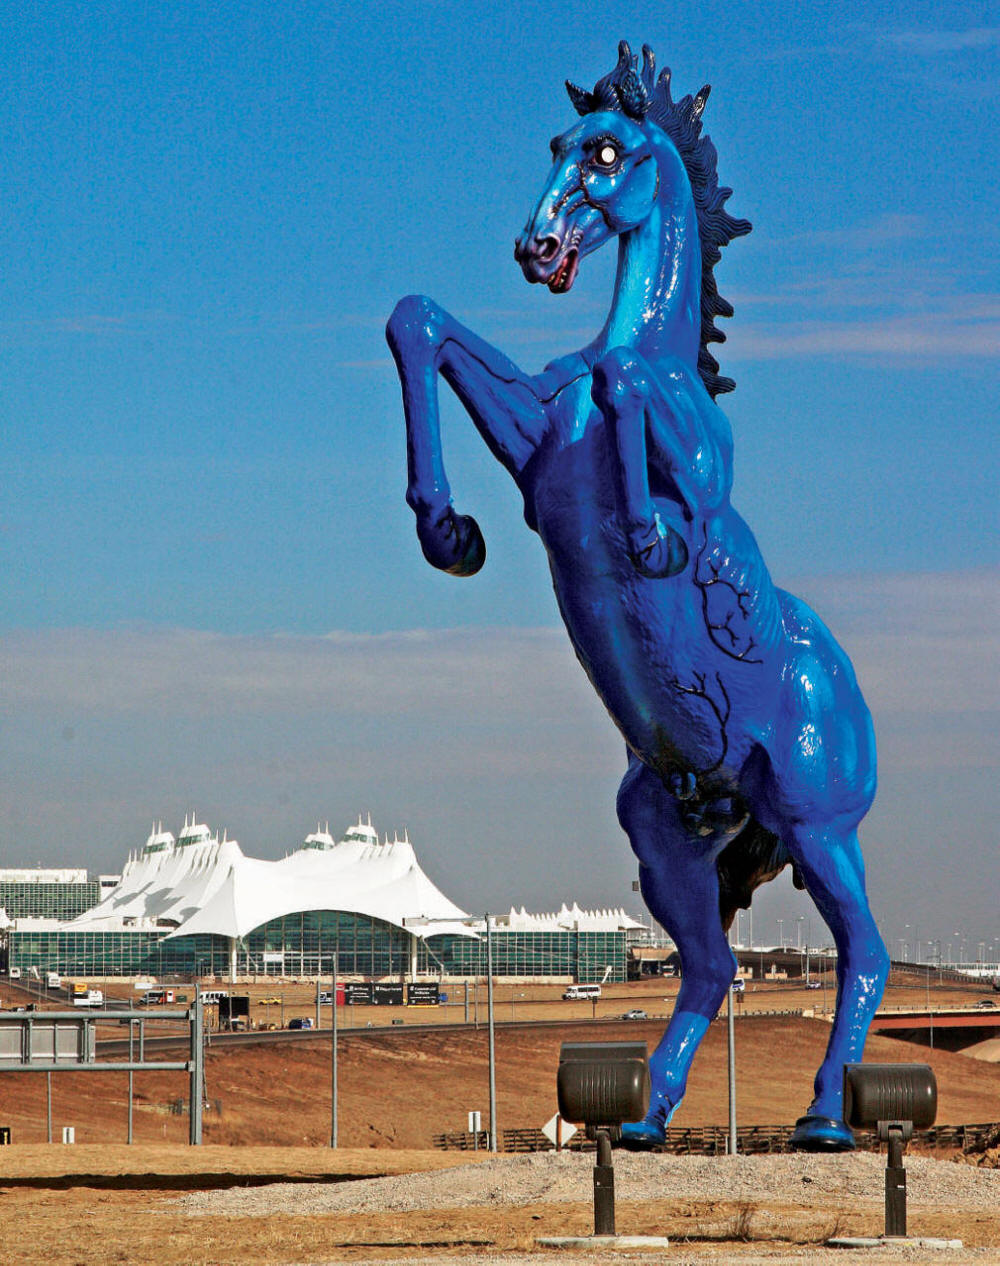 Denver New World Airport 32 Foot Statue of the Horse of the Apocalypse